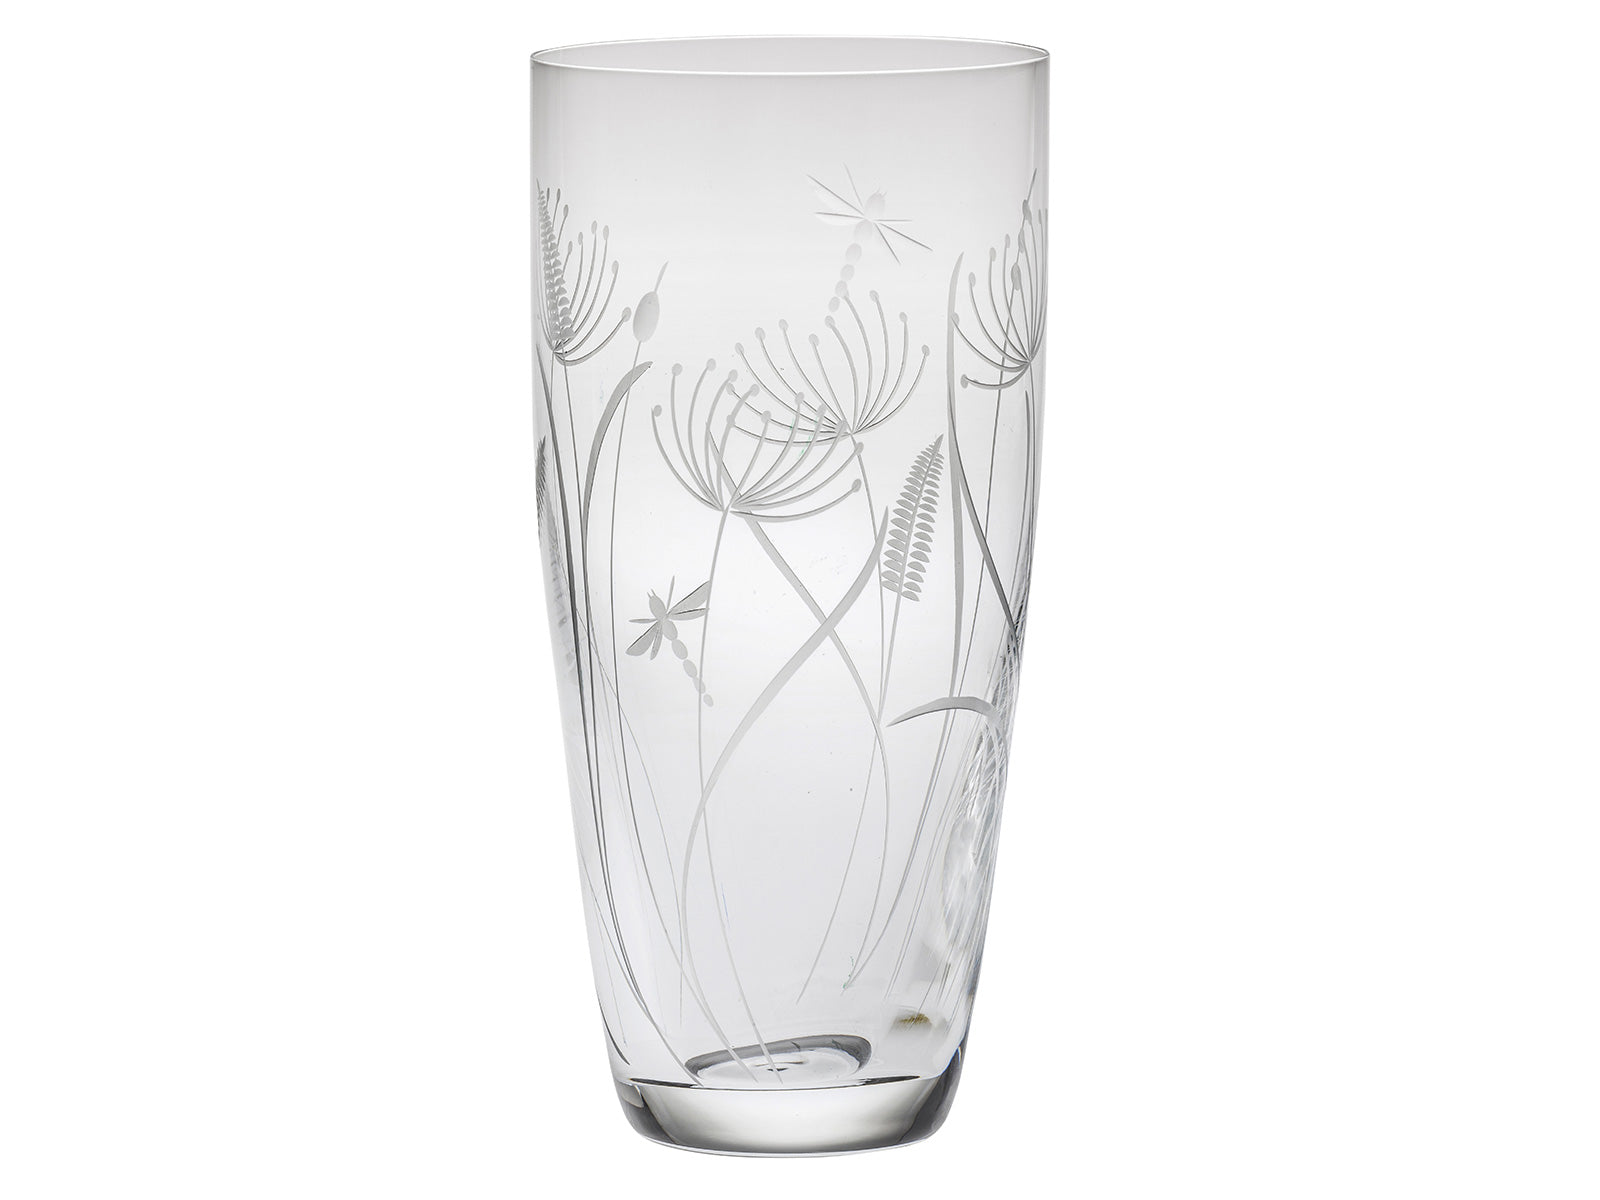 Royal Scot Crystal Dragonfly Vase - Tall is hand-crafted i Britain from the finest crystal and engraved with long-stemmed depictions of dandelions and bulrushes, as well as a pair of dragonflies flying amongst them. A thin and wider vase, this would be ideal for long-stemmed flowers such as sunflowers.